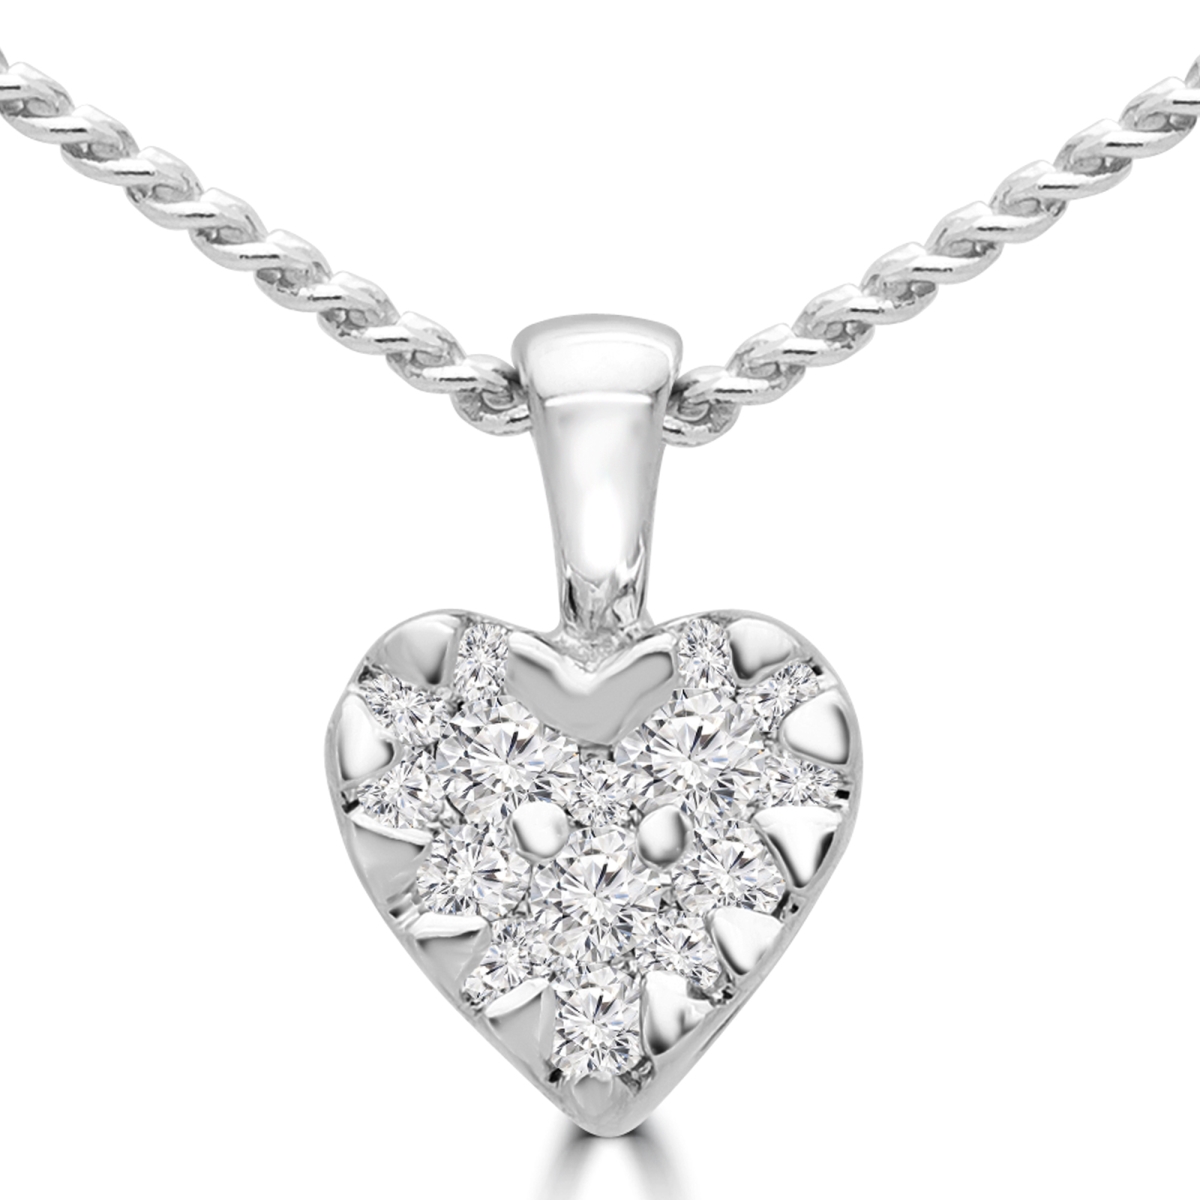 Mdr190029 0.12 Ctw Round Diamond Cluster Heart Pendant Necklace In 14k White Gold With Chain